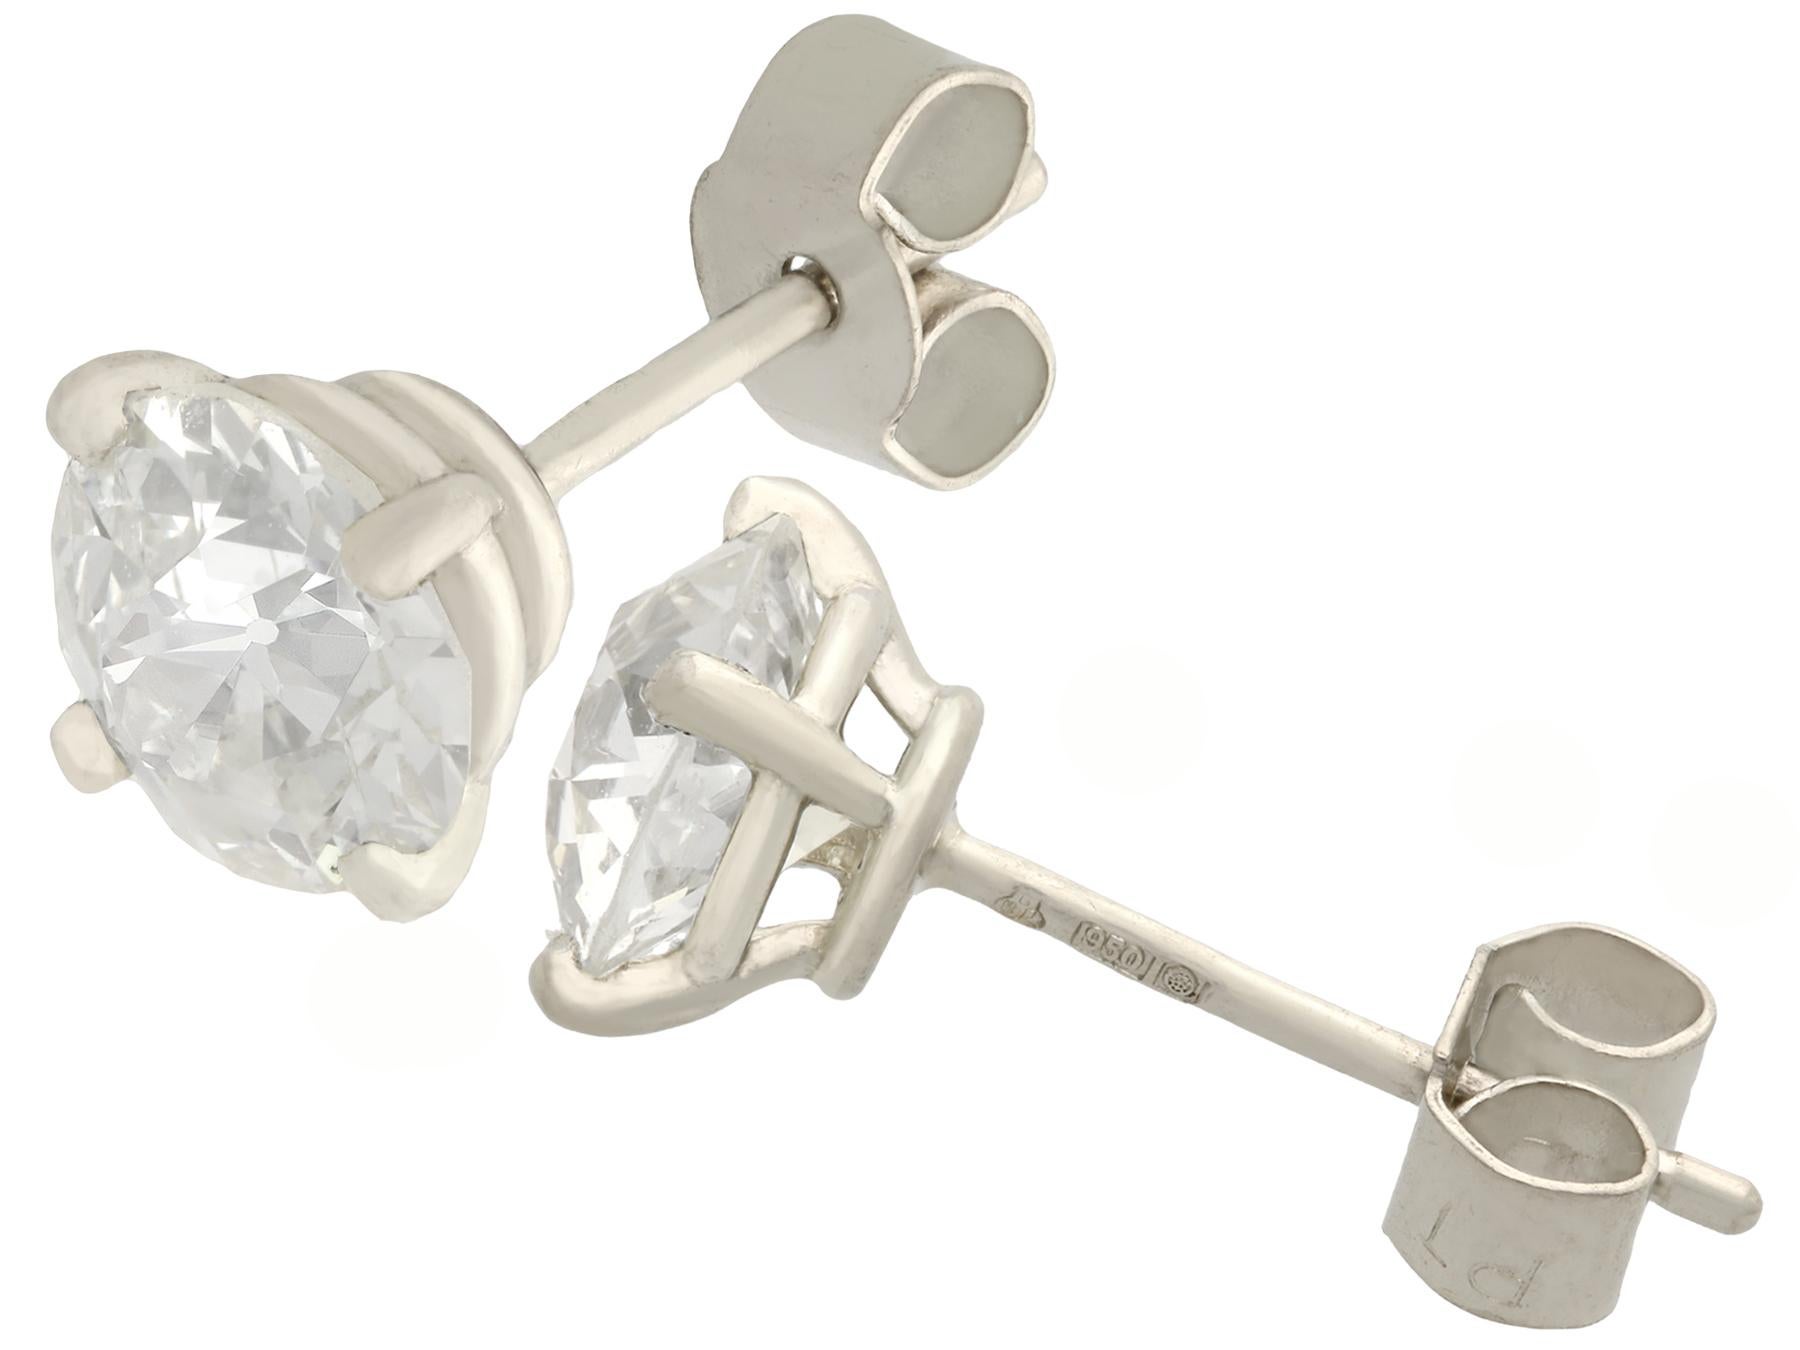 A stunning pair of vintage and contemporary 1.48 carat diamond and platinum stud earrings; part of our diverse diamond jewelry and estate jewelry collections.

These stunning, fine and impressive diamond stud earrings have been crafted in